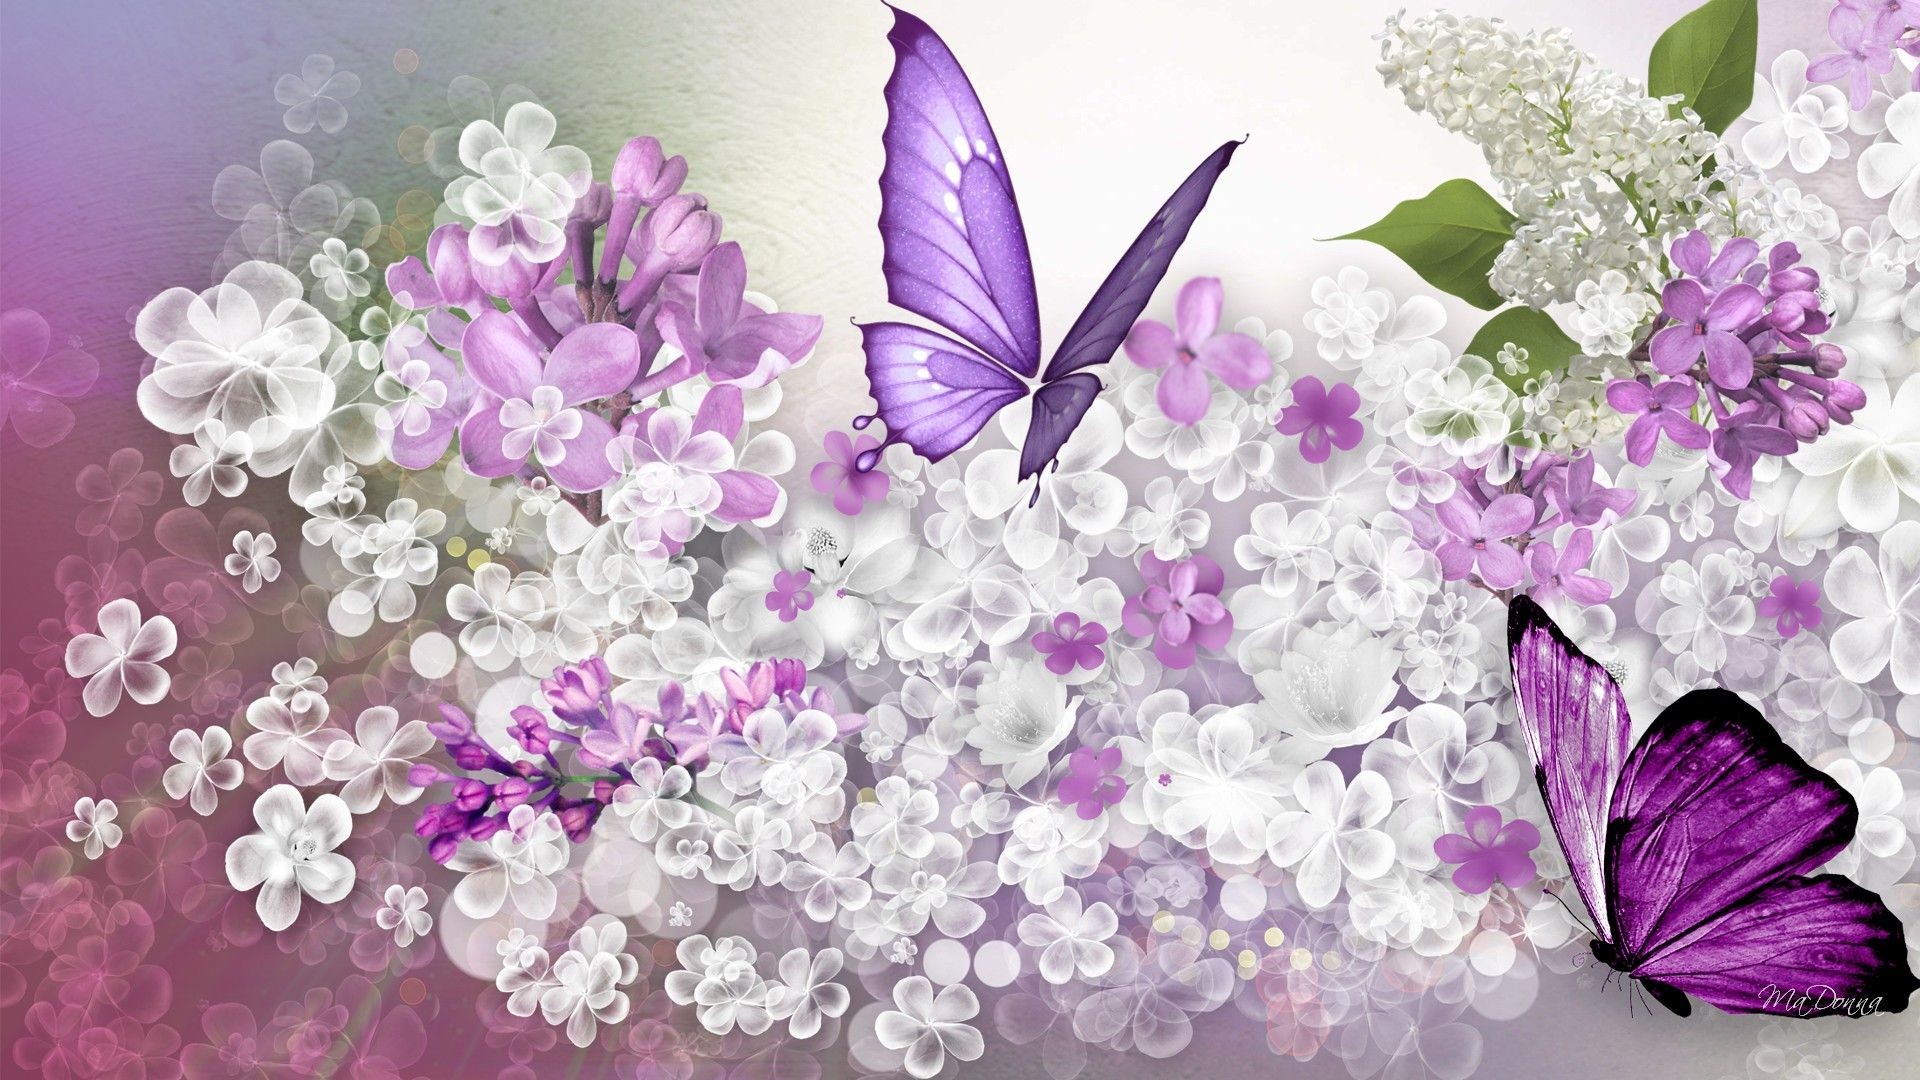 1920x1080 High Definition Collection: Lilac Wallpapers, 37 Full HD Lilac .